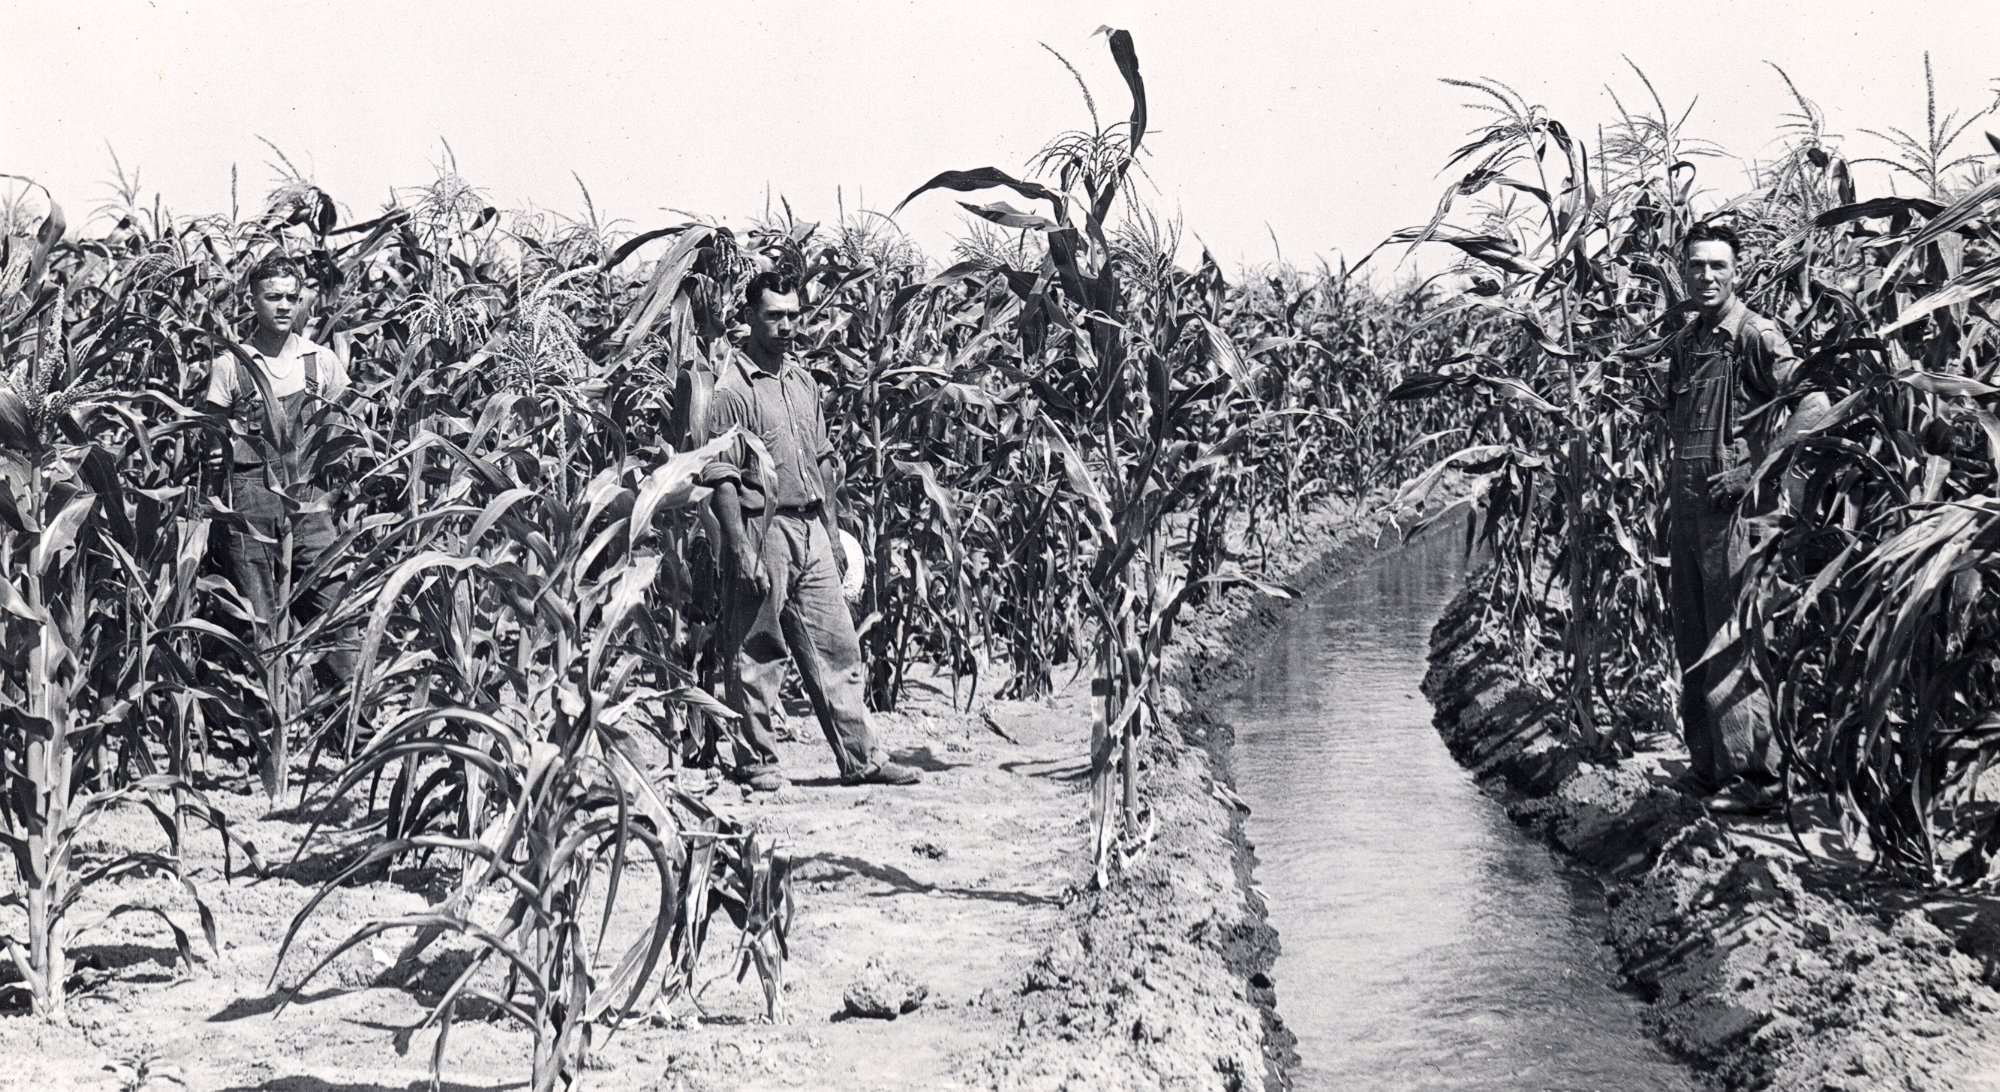 Central marks 75th anniversary of irrigation deliveries from Lake McConaughy